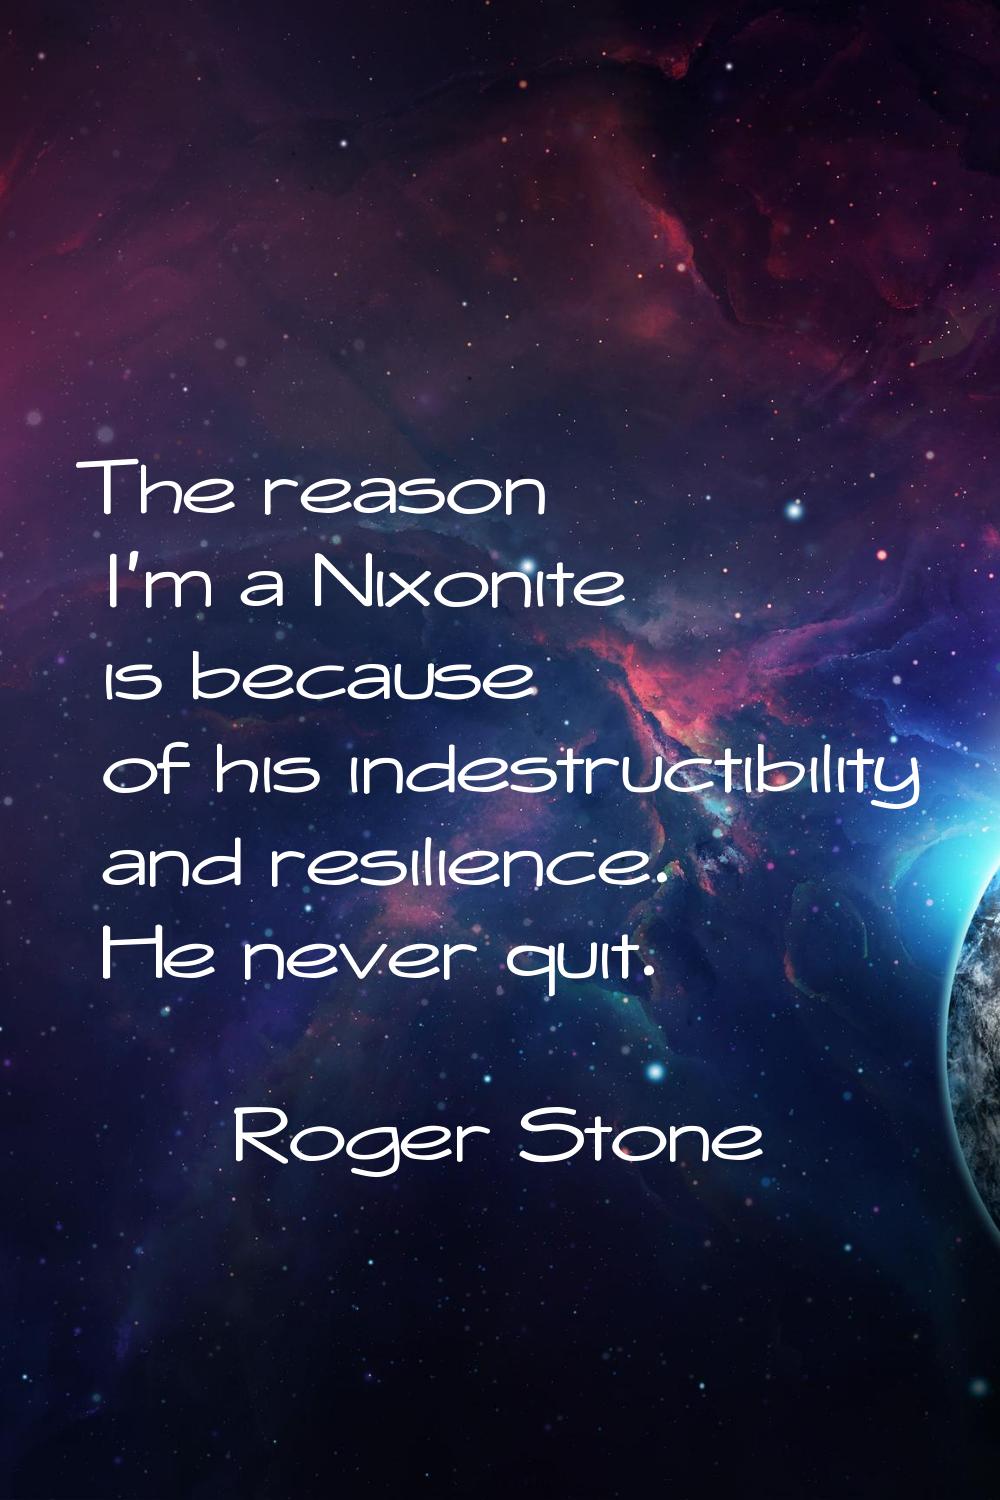 The reason I'm a Nixonite is because of his indestructibility and resilience. He never quit.